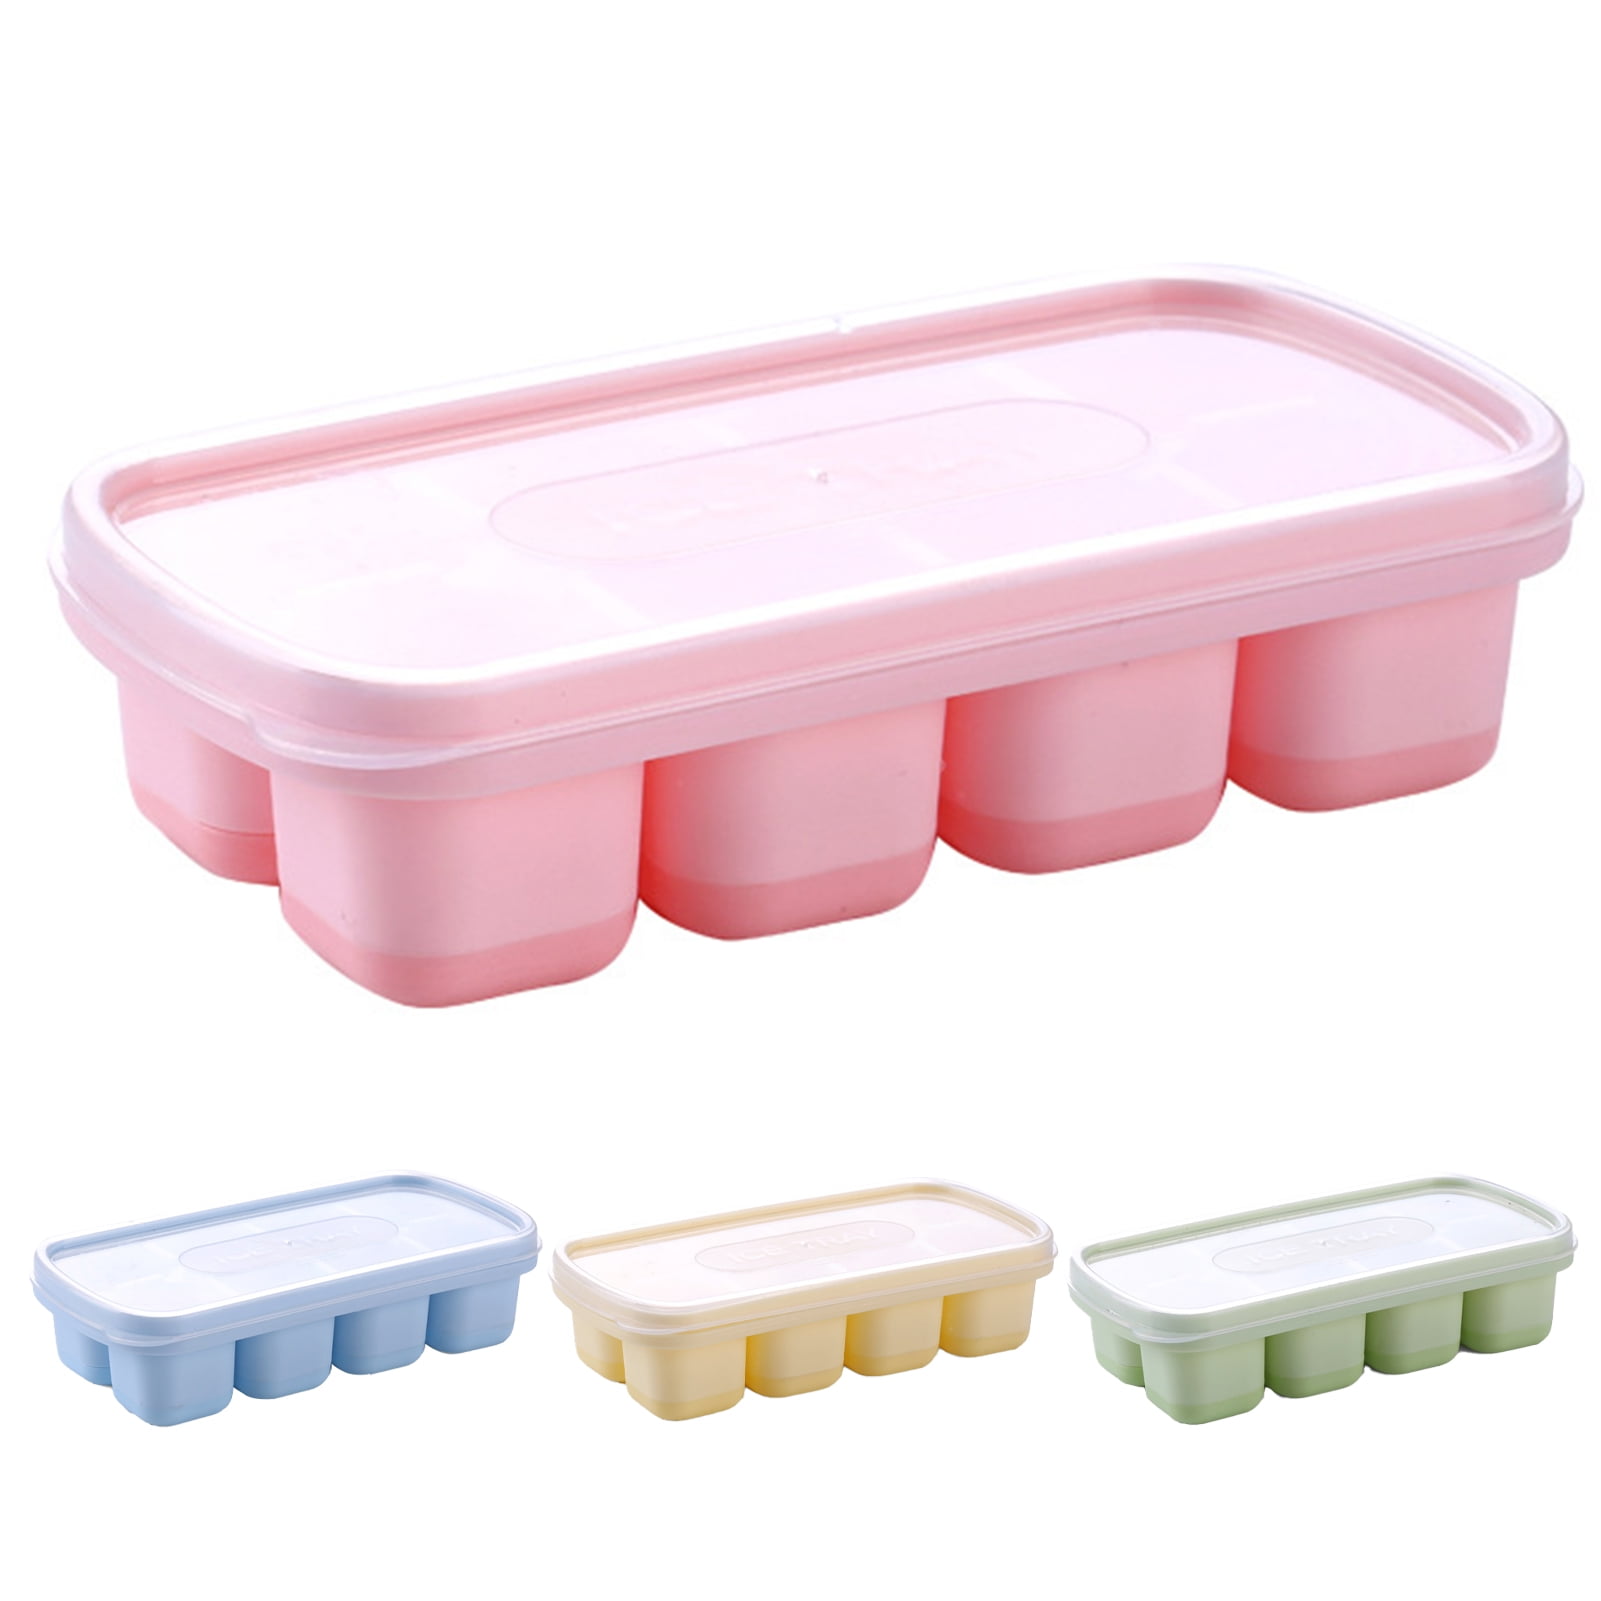  Ice Cube Trays with Stop-Nasty-Smell Lids